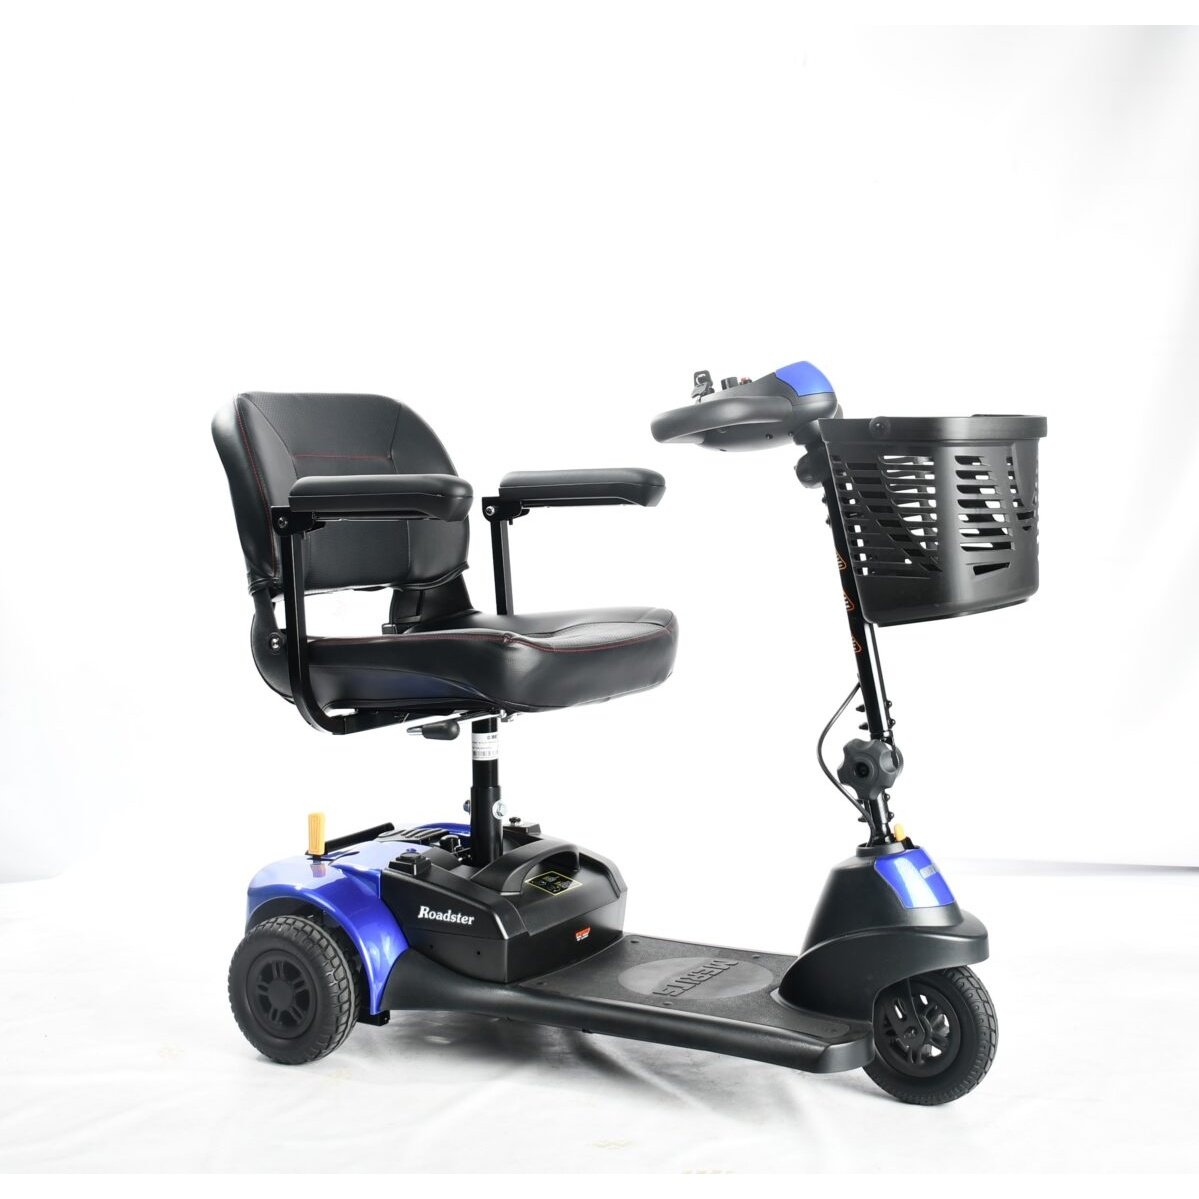 Merits Roadster 3 (S731A) 3-Wheel Mobility Scooter with Detachable Frame